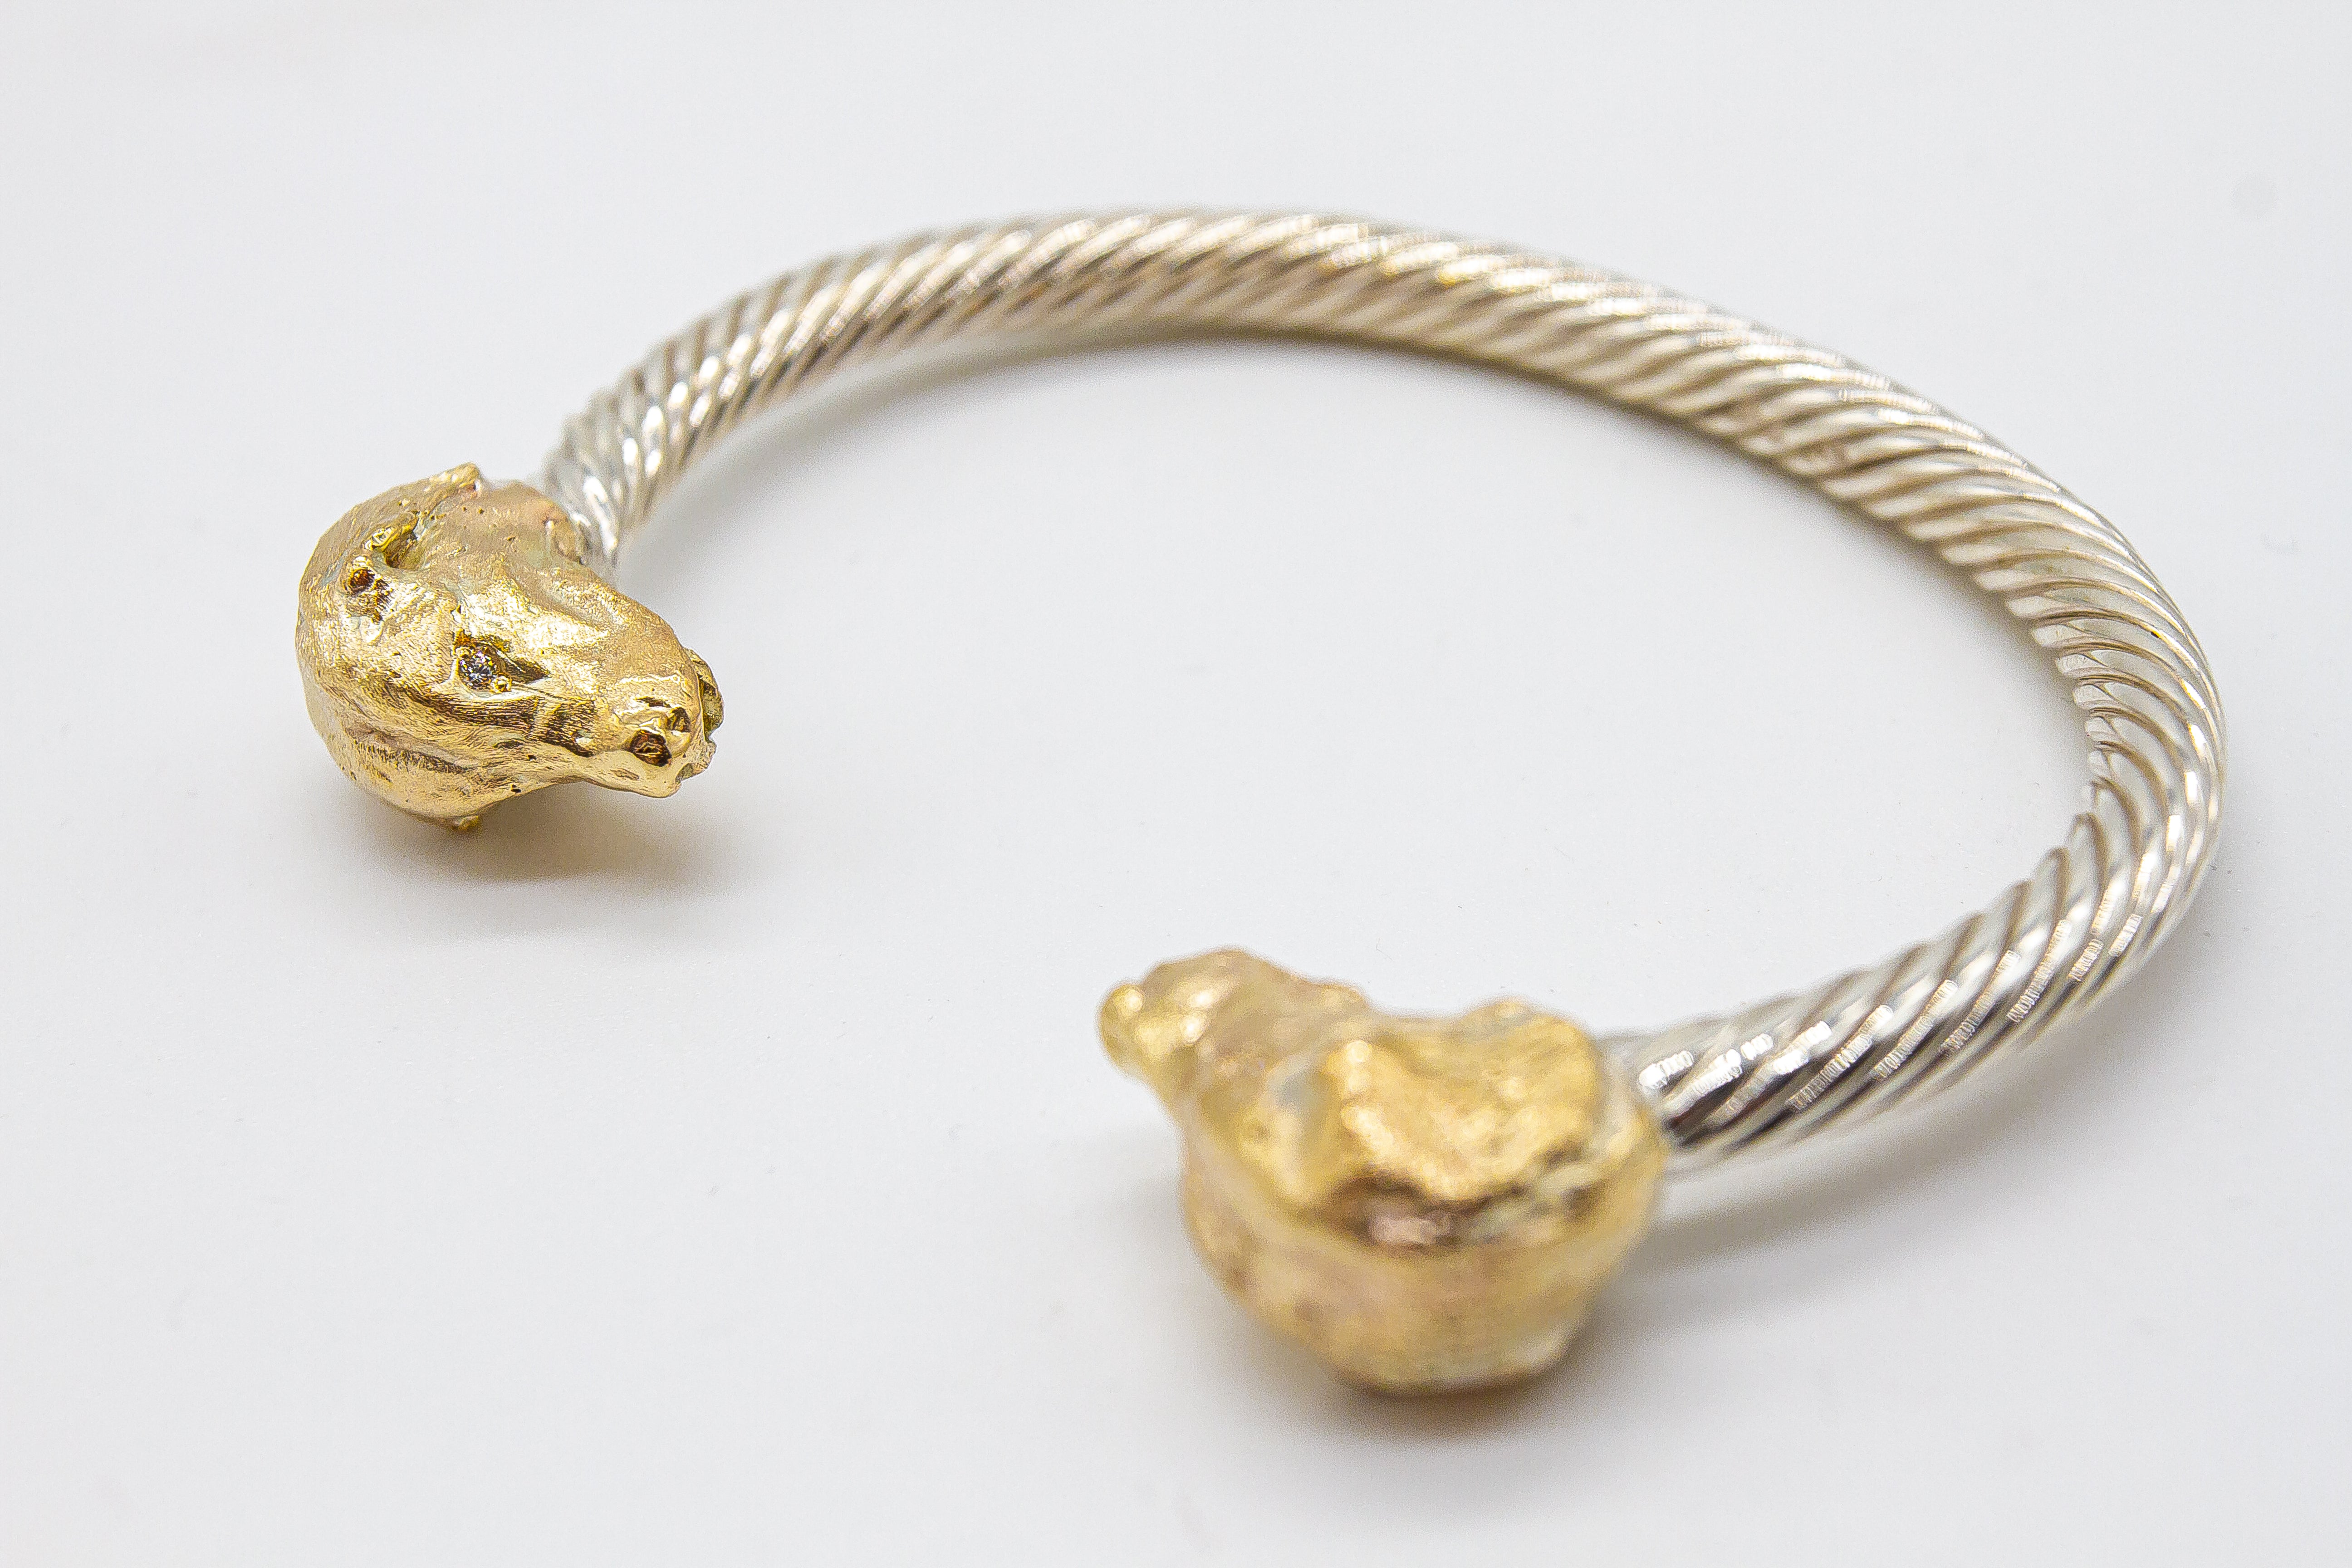 Gold/Silver Bangle with Diamond Eyes